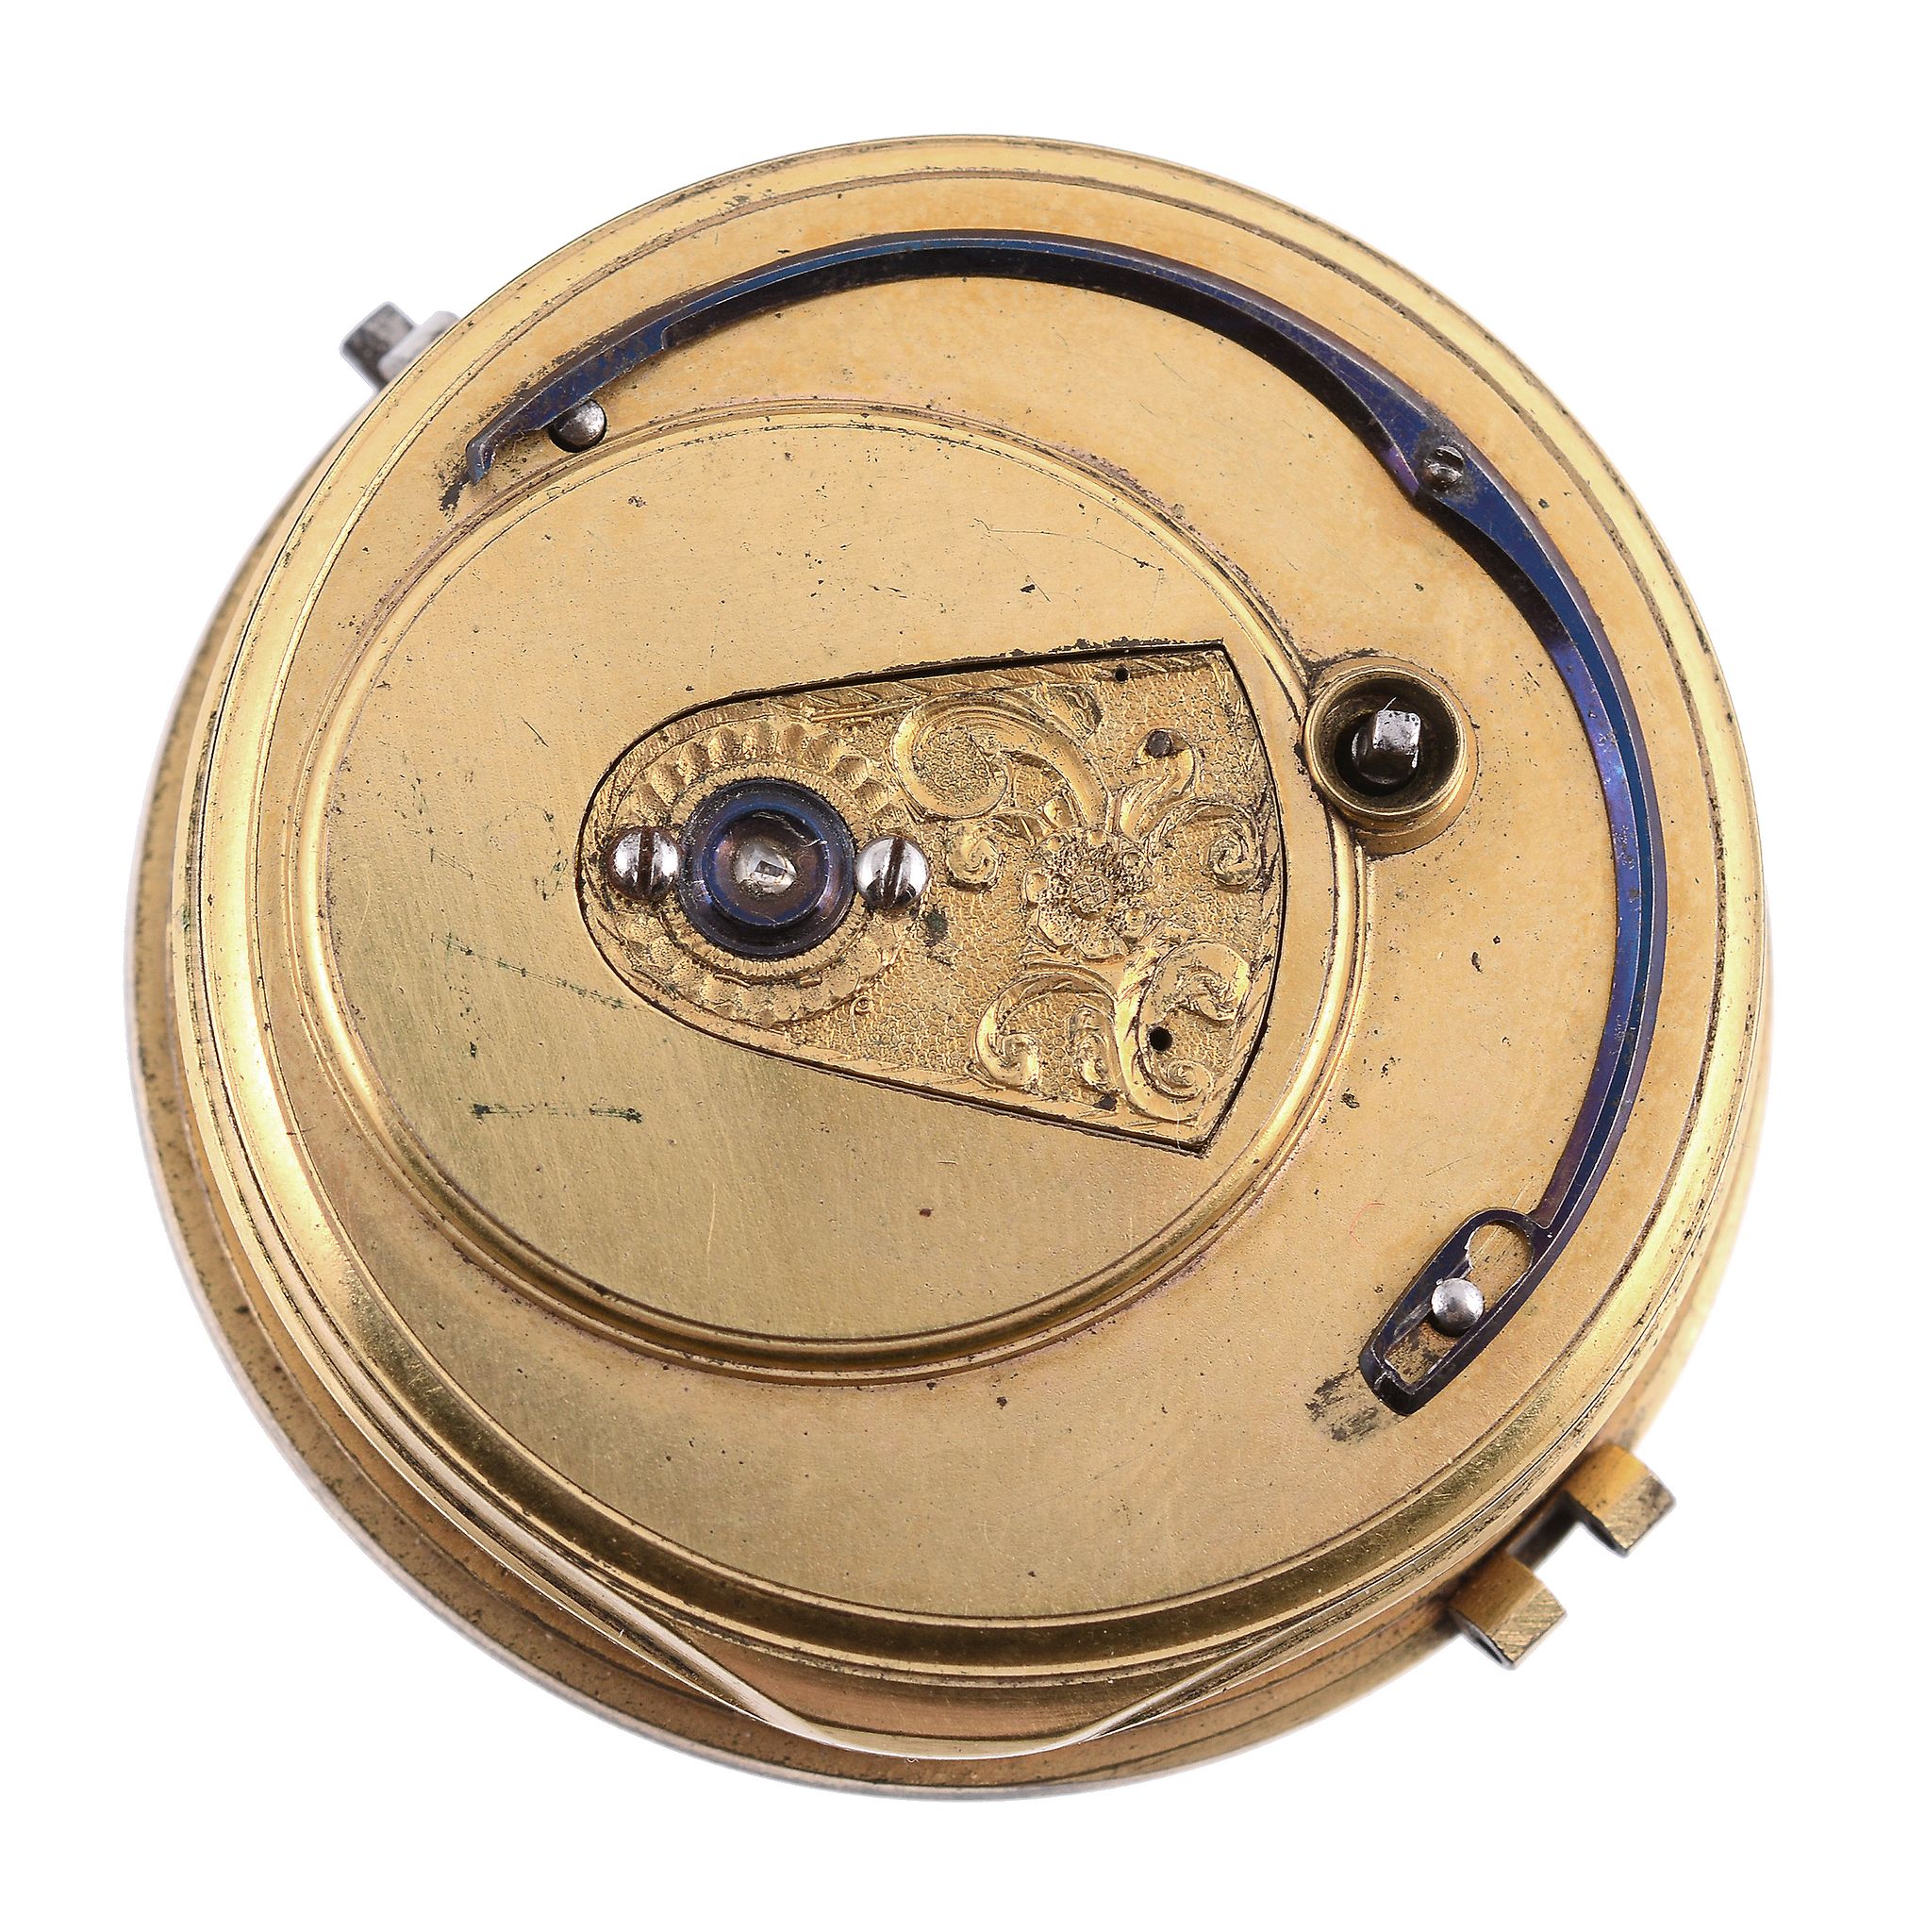 Litherland Whiteside Co., an English fusee movement with rack lever escapement, no. 6299, with